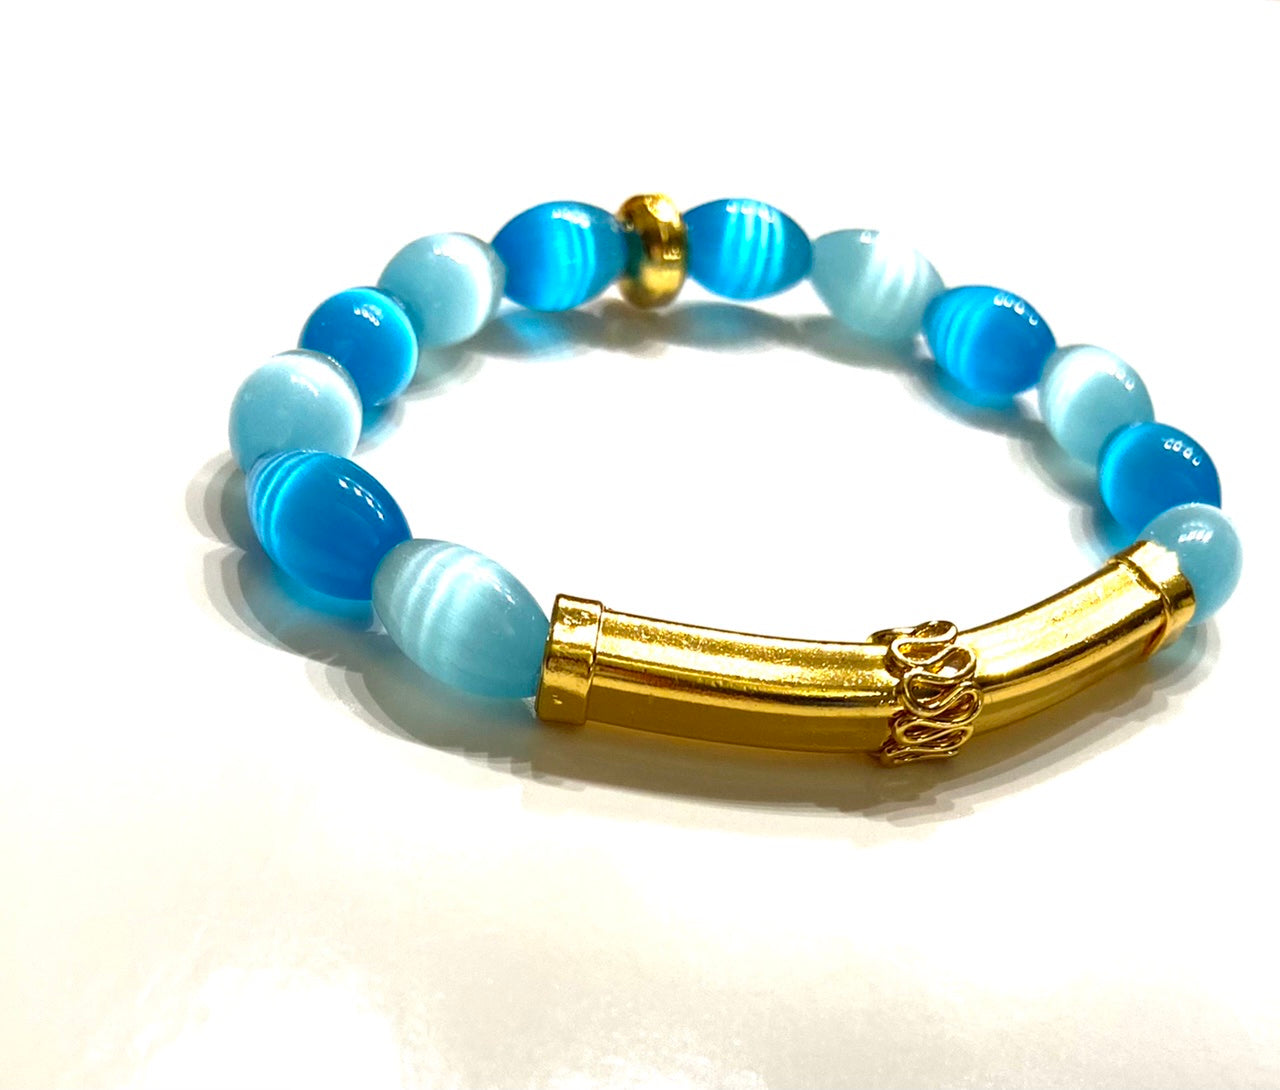 Colorful Sky and Light Blue Mexican Fire Opal Gemstone Bracelet with 18k Gold Bali Tube Bead